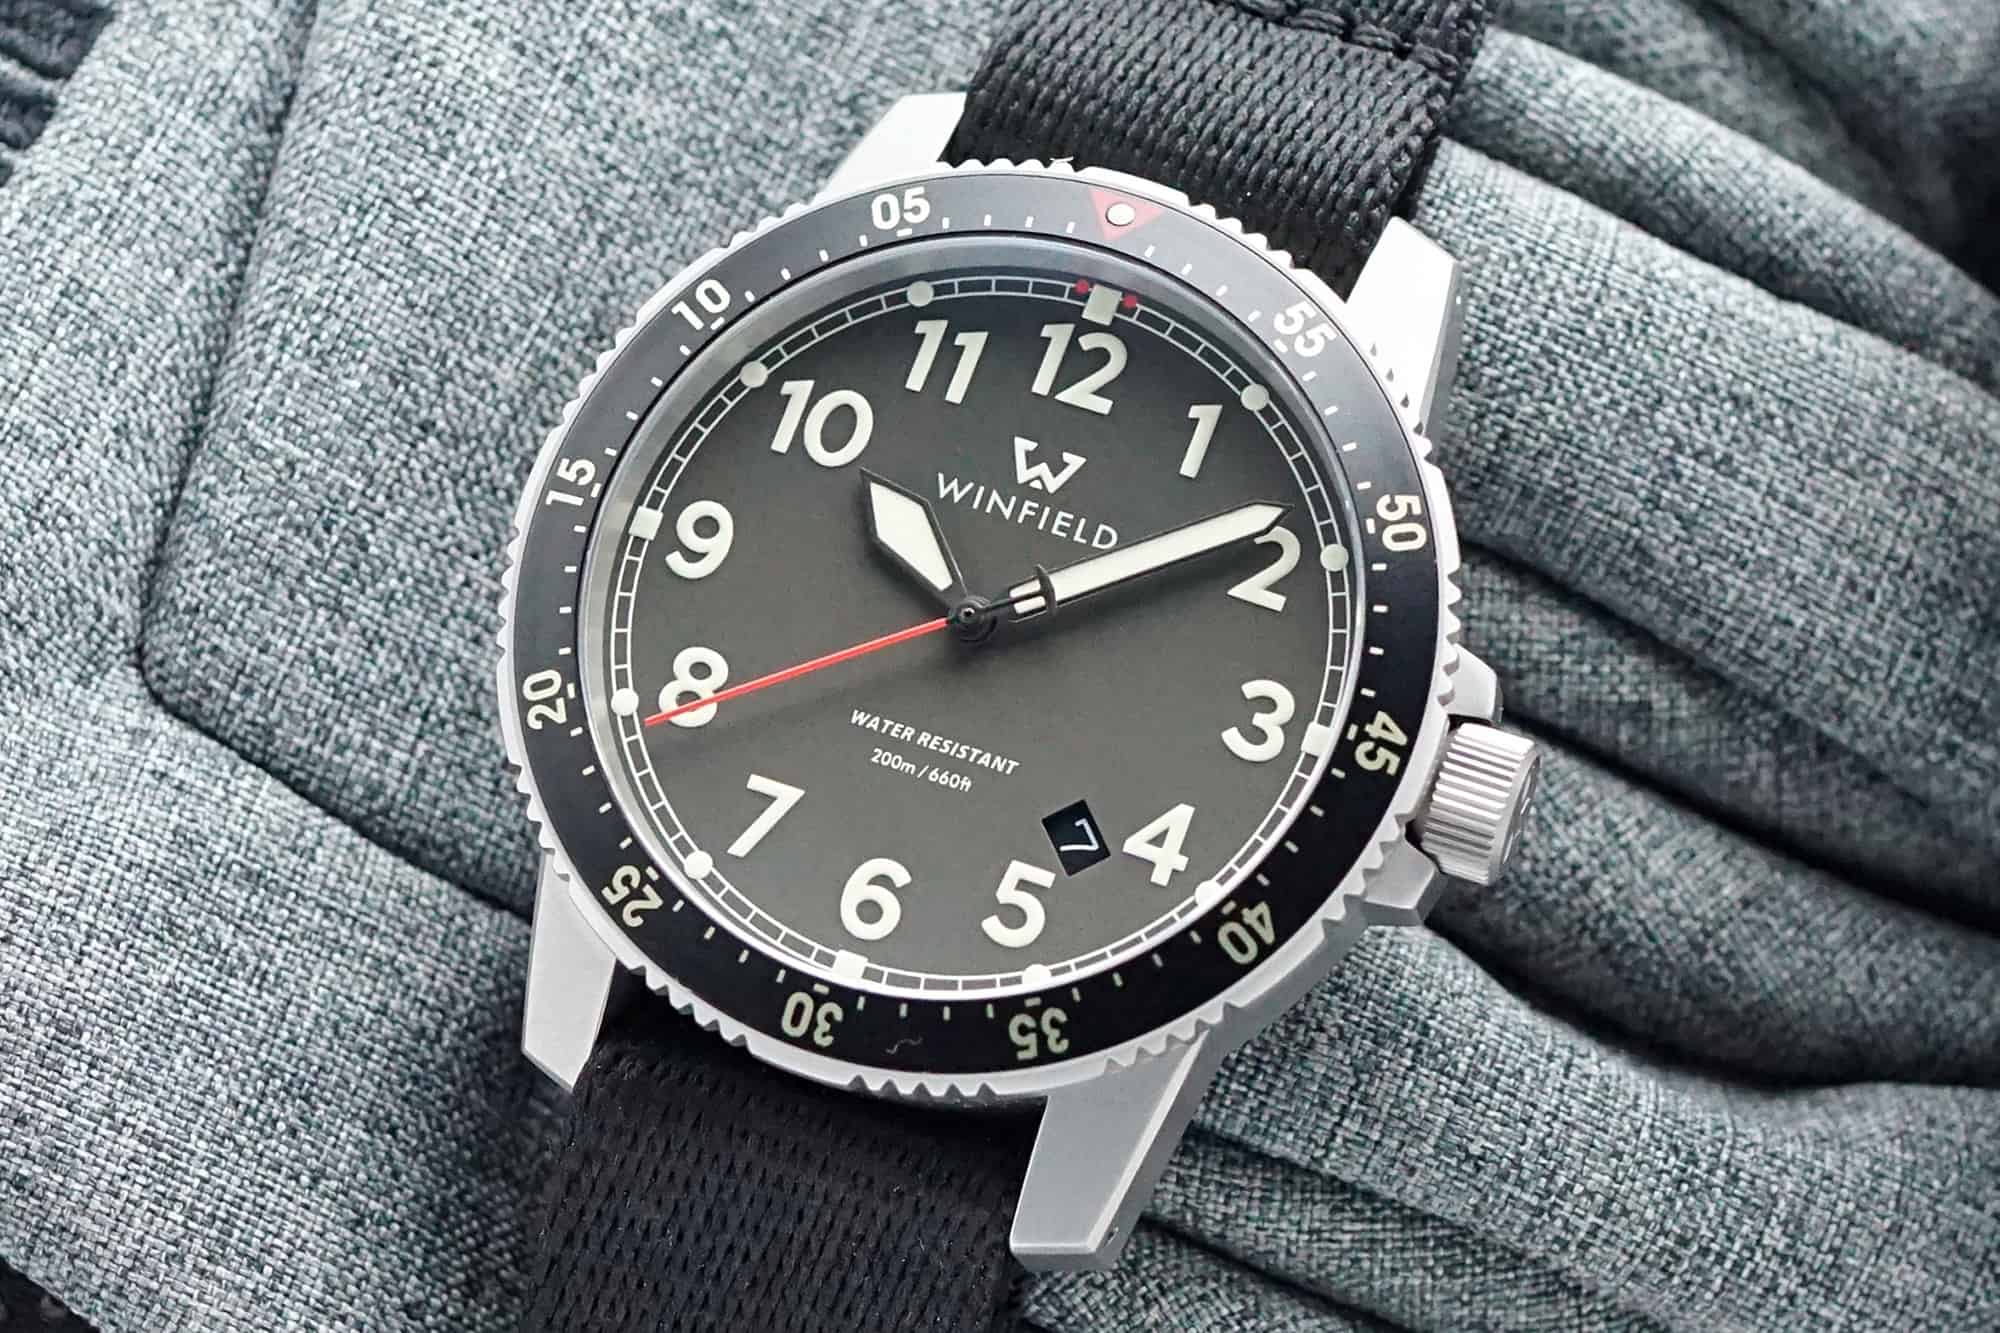 Introducing the Mission Timer One, the Debut Watch from Winfield Watch Company